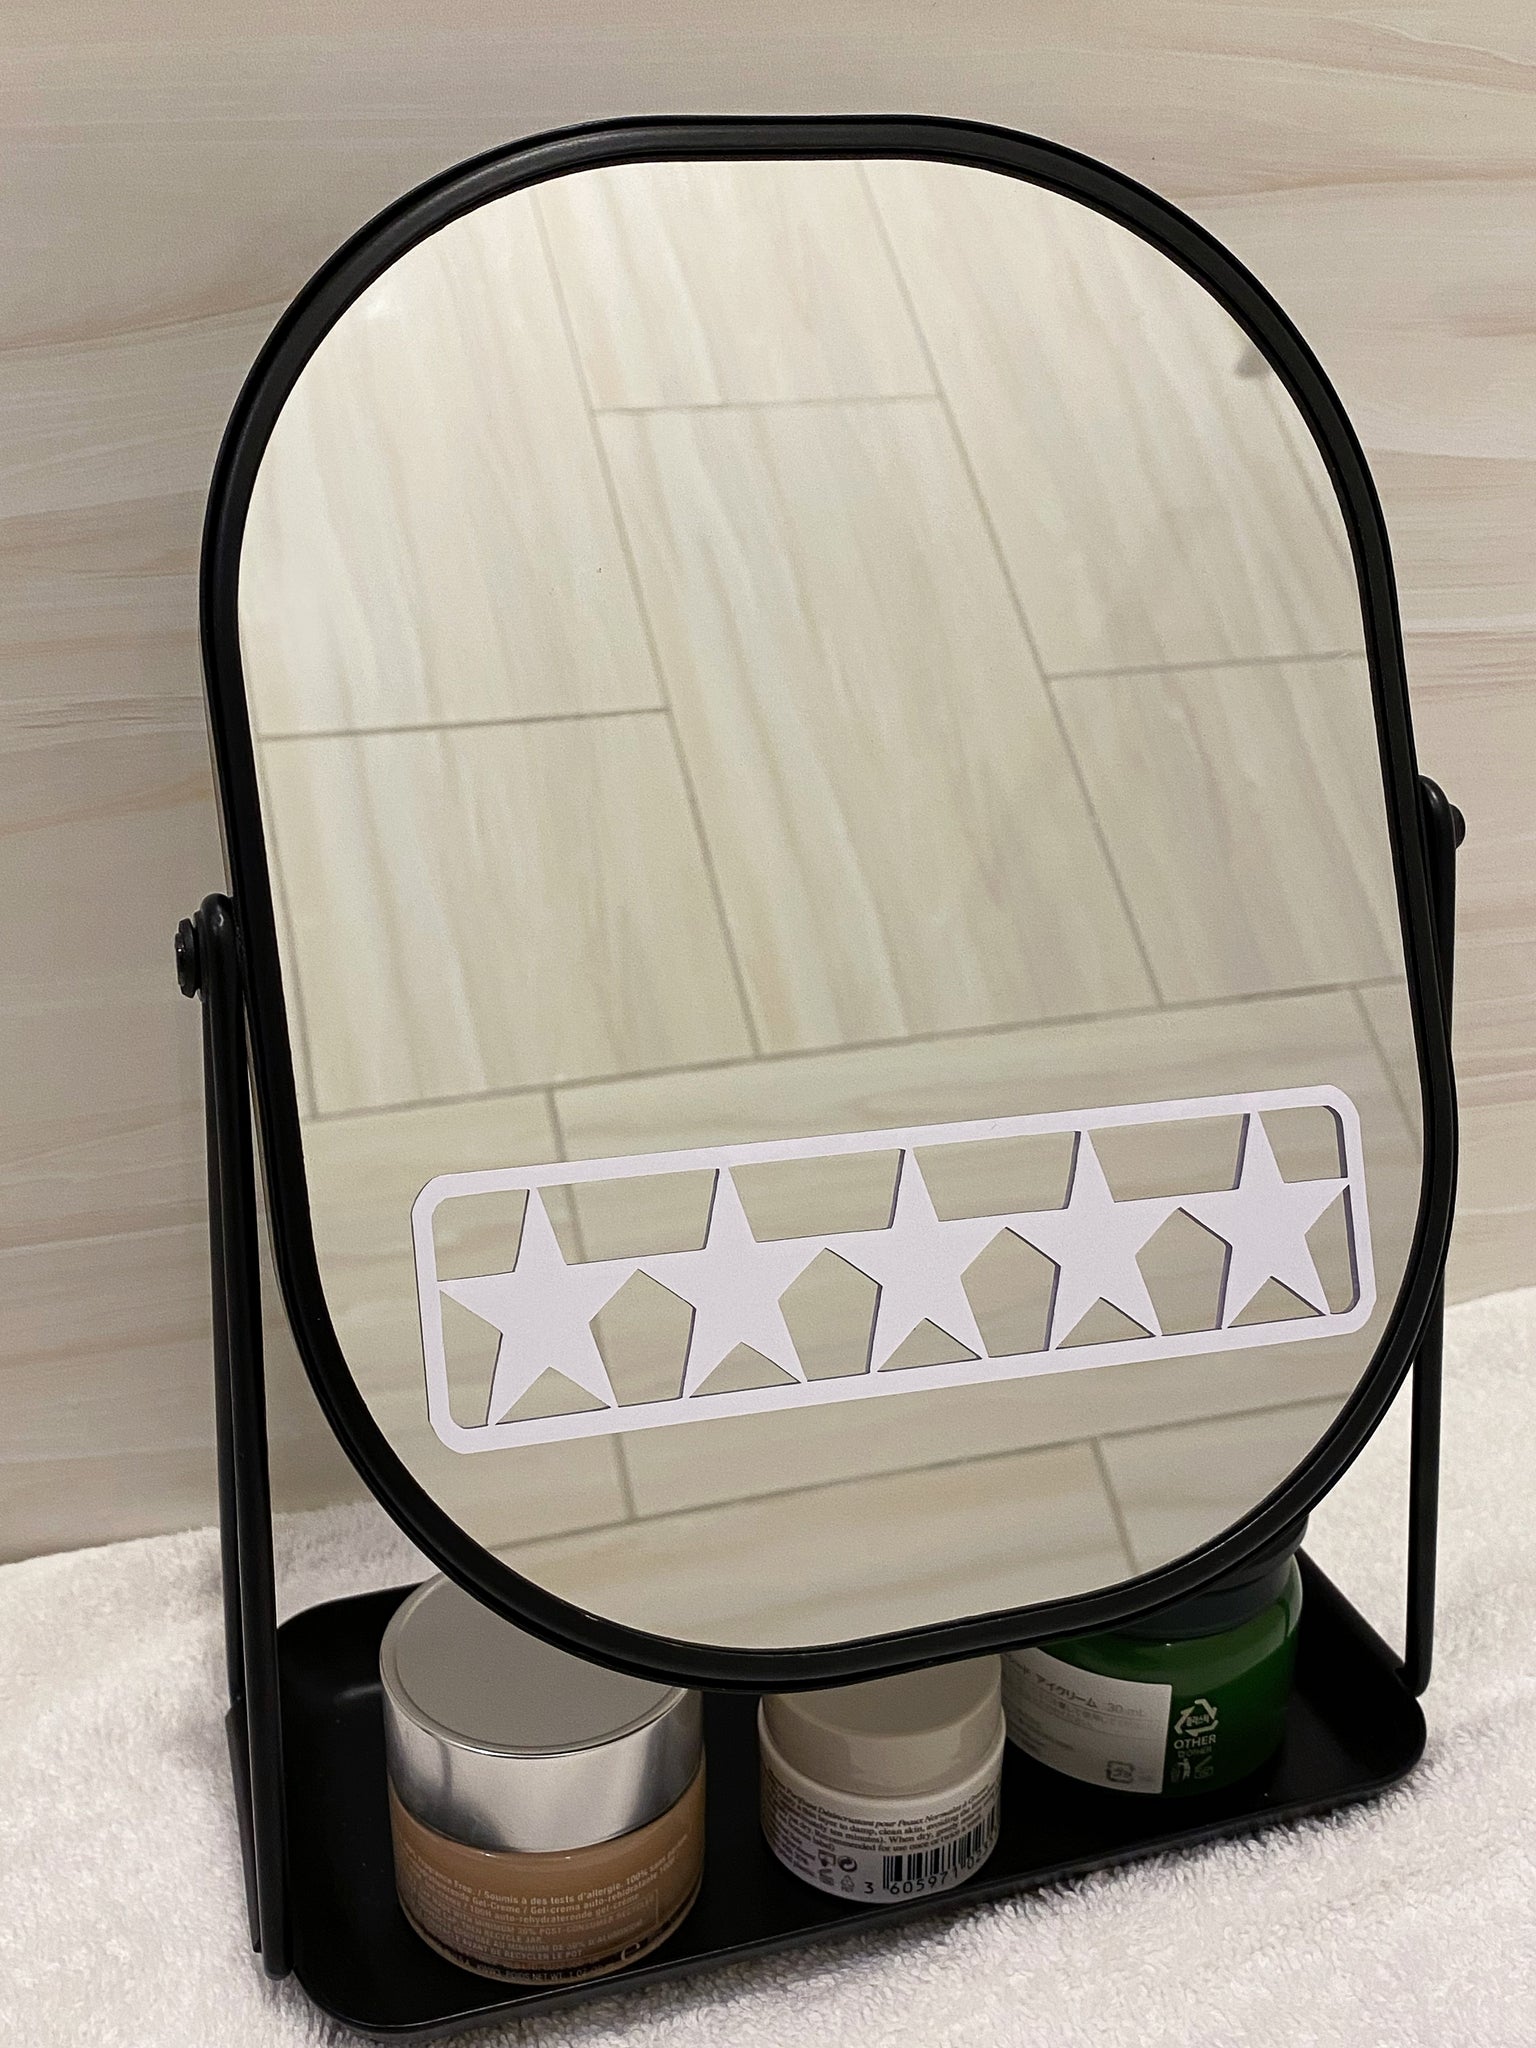 White 5 star mirror decal for daily positive affirmation. Mirror affirmation decal placed on modern black mirror for bathroom. Black mirror for bathroom has a tray for skincare products.